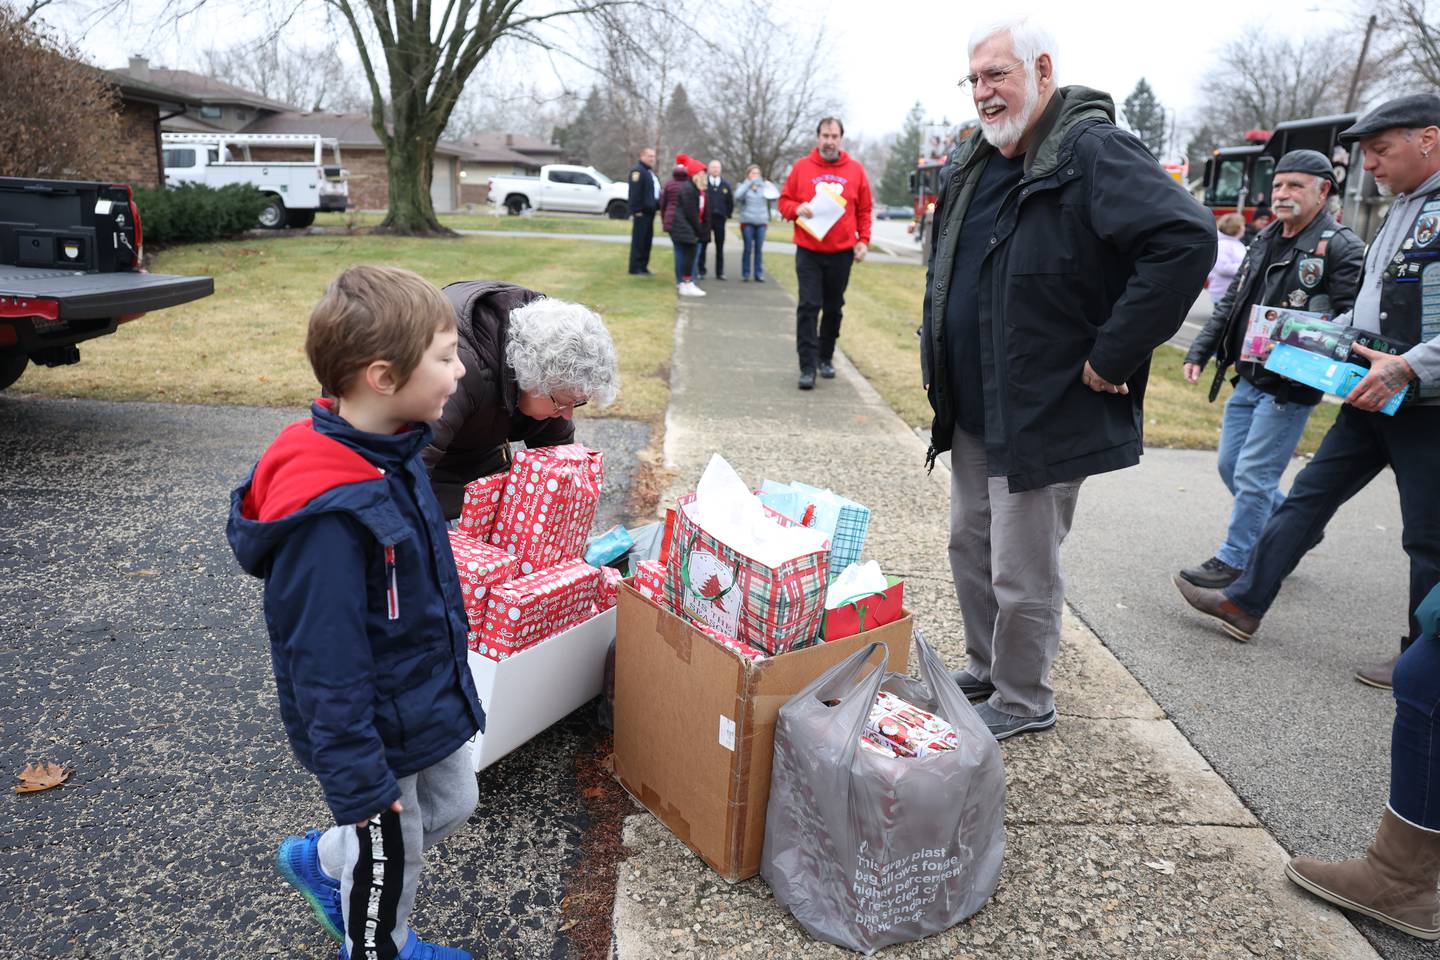 Gage Jenicek, 5, watches as volunteers deliver gifts to the Jenicek family on Saturday, Dec. 10, 2022, in Lockport.